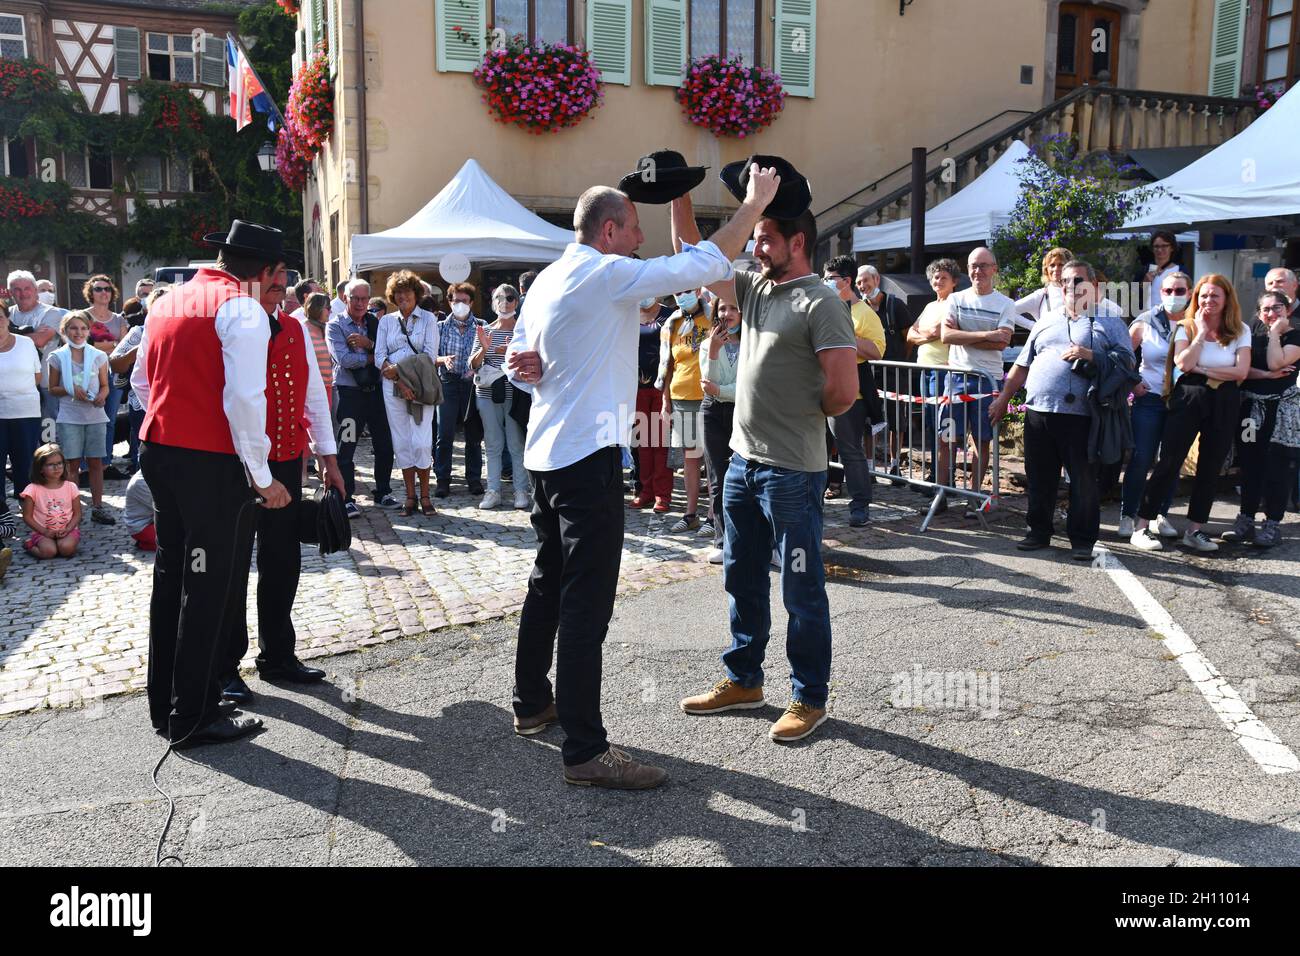 Men playing musical hats with traditional Alsace folk dancing group in the village of Turkheim during the Alsace grape harvest 2021 Stock Photo